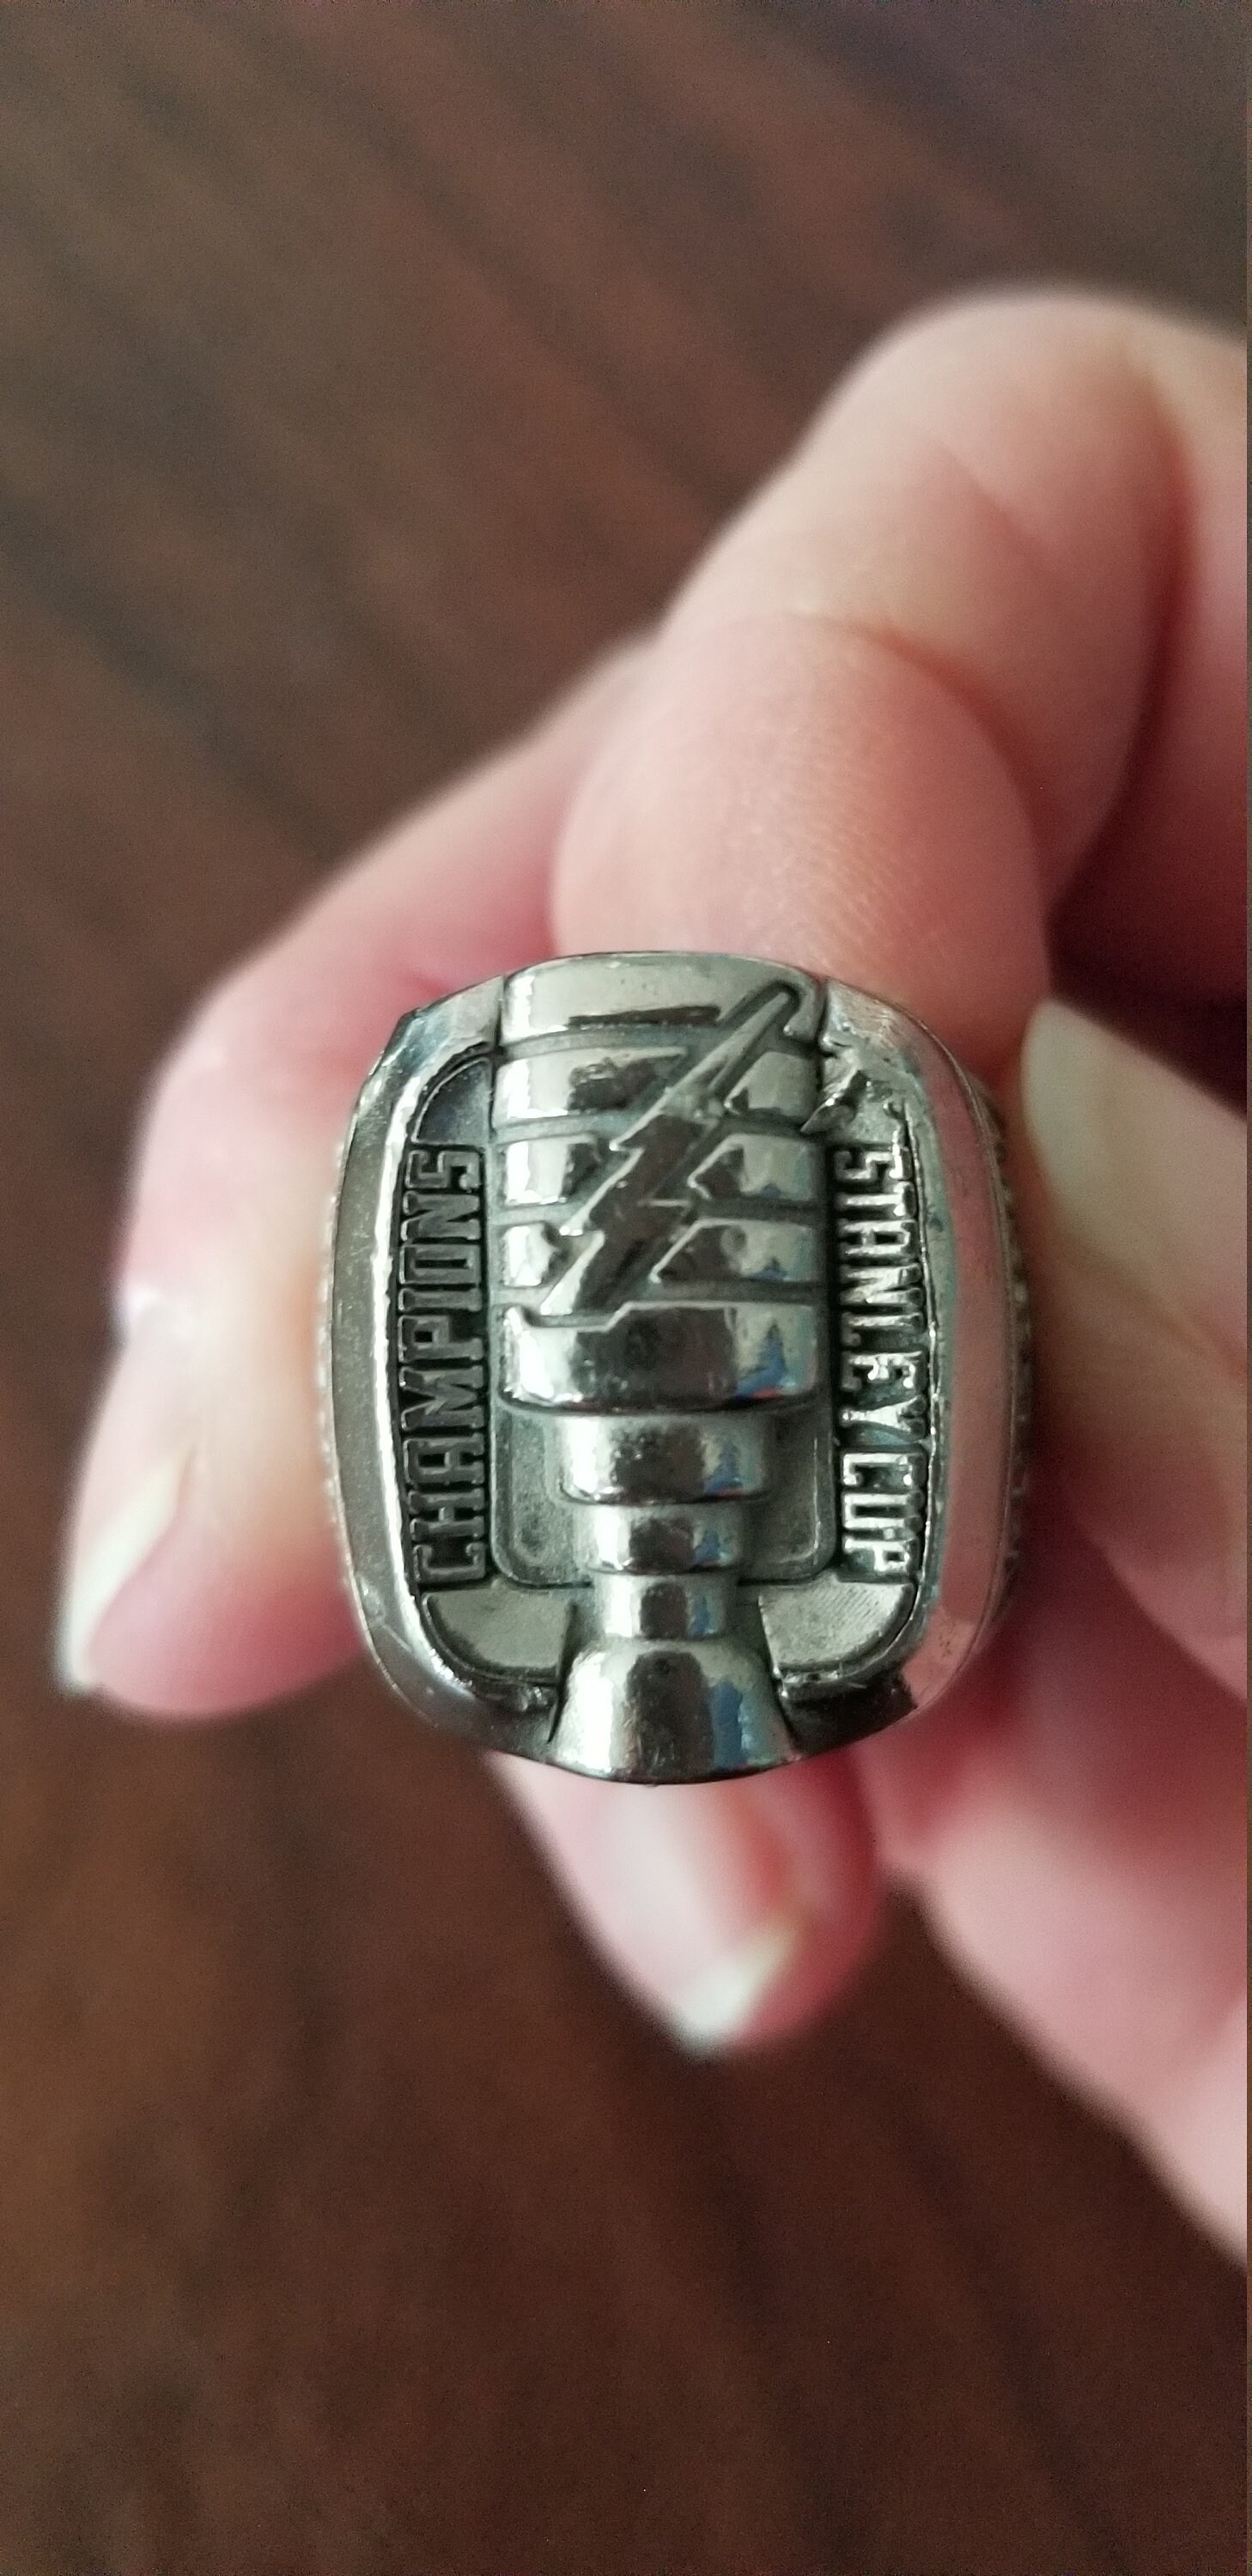 NHL Tampa Bay Lightning Stanley Cup Championship Replica Ring Size